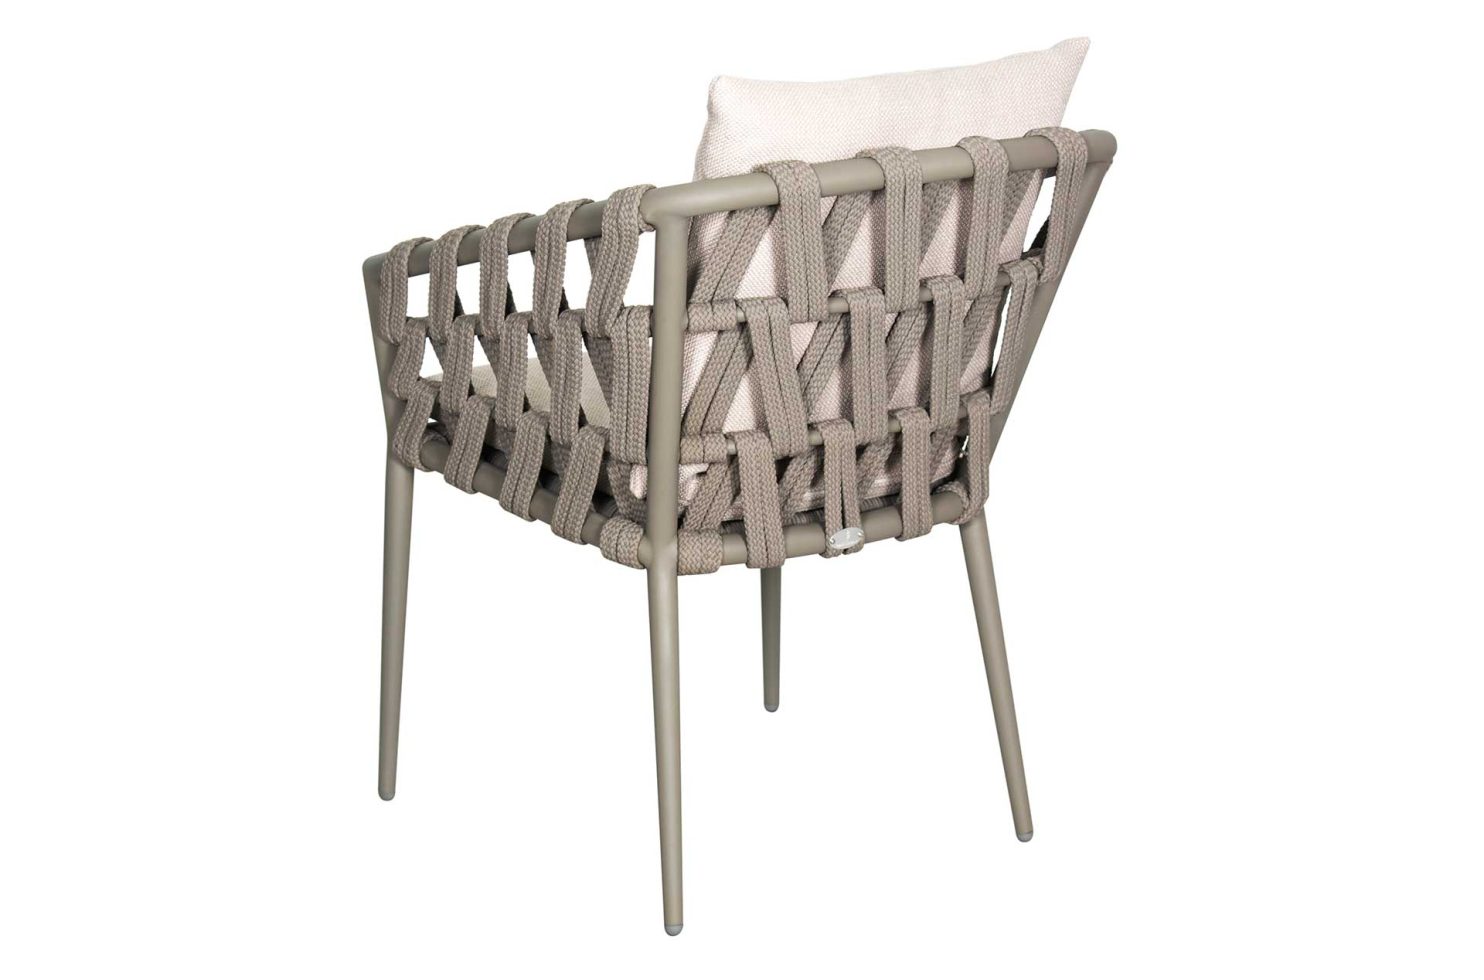 arch andaman dining chair 620FT064P2DG 1 3Q back web